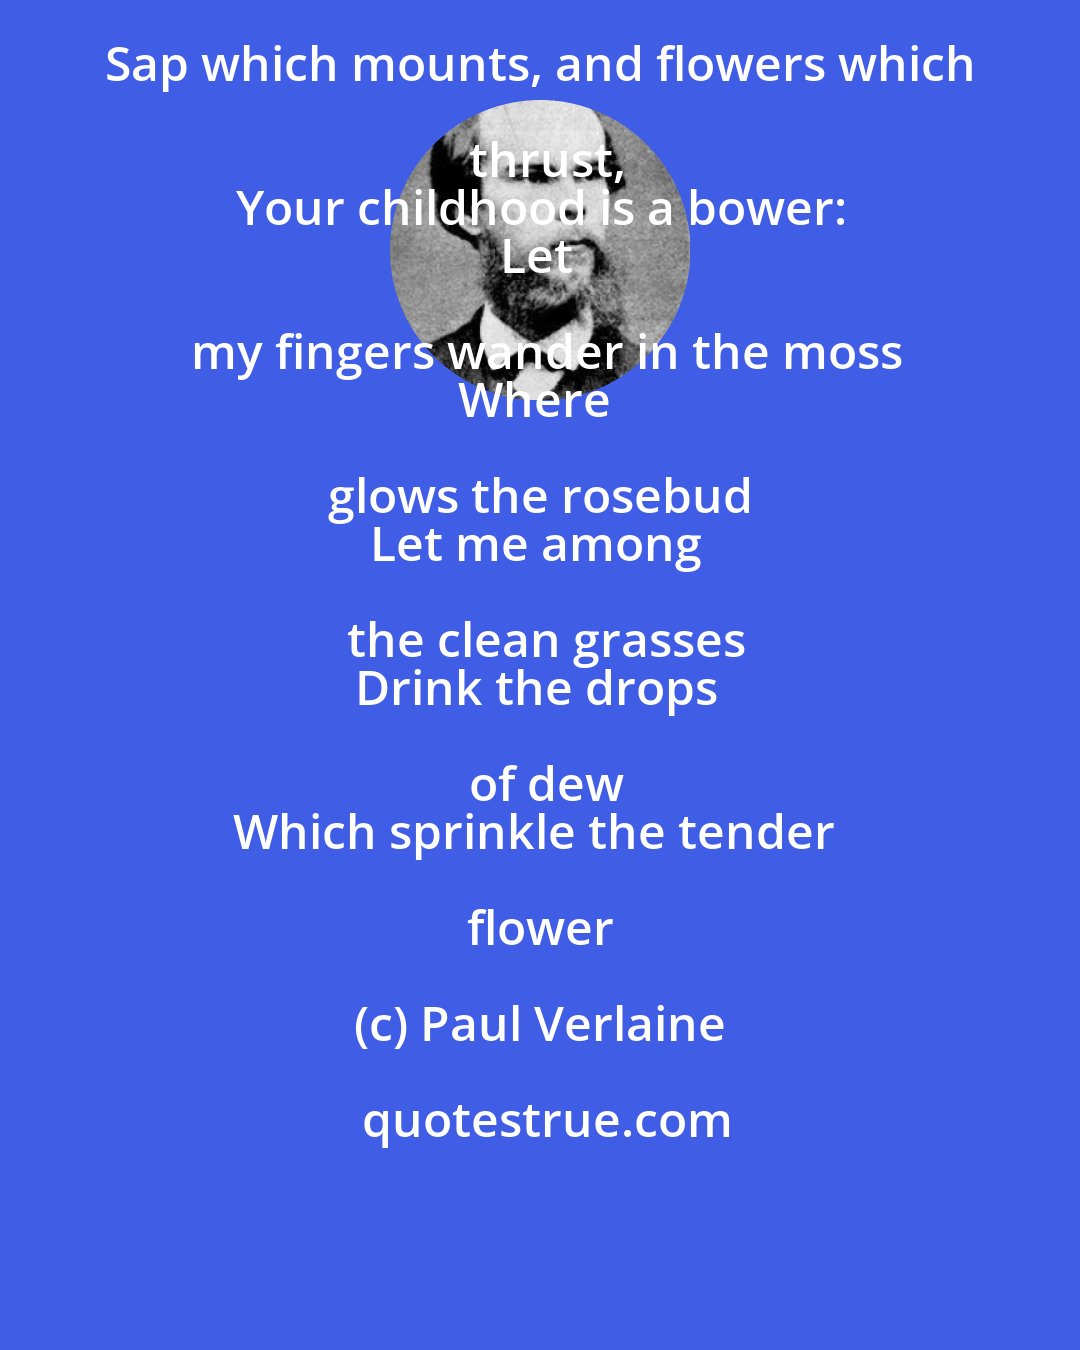 Paul Verlaine: Sap which mounts, and flowers which thrust,
Your childhood is a bower:
Let my fingers wander in the moss
Where glows the rosebud 
Let me among the clean grasses
Drink the drops of dew
Which sprinkle the tender flower